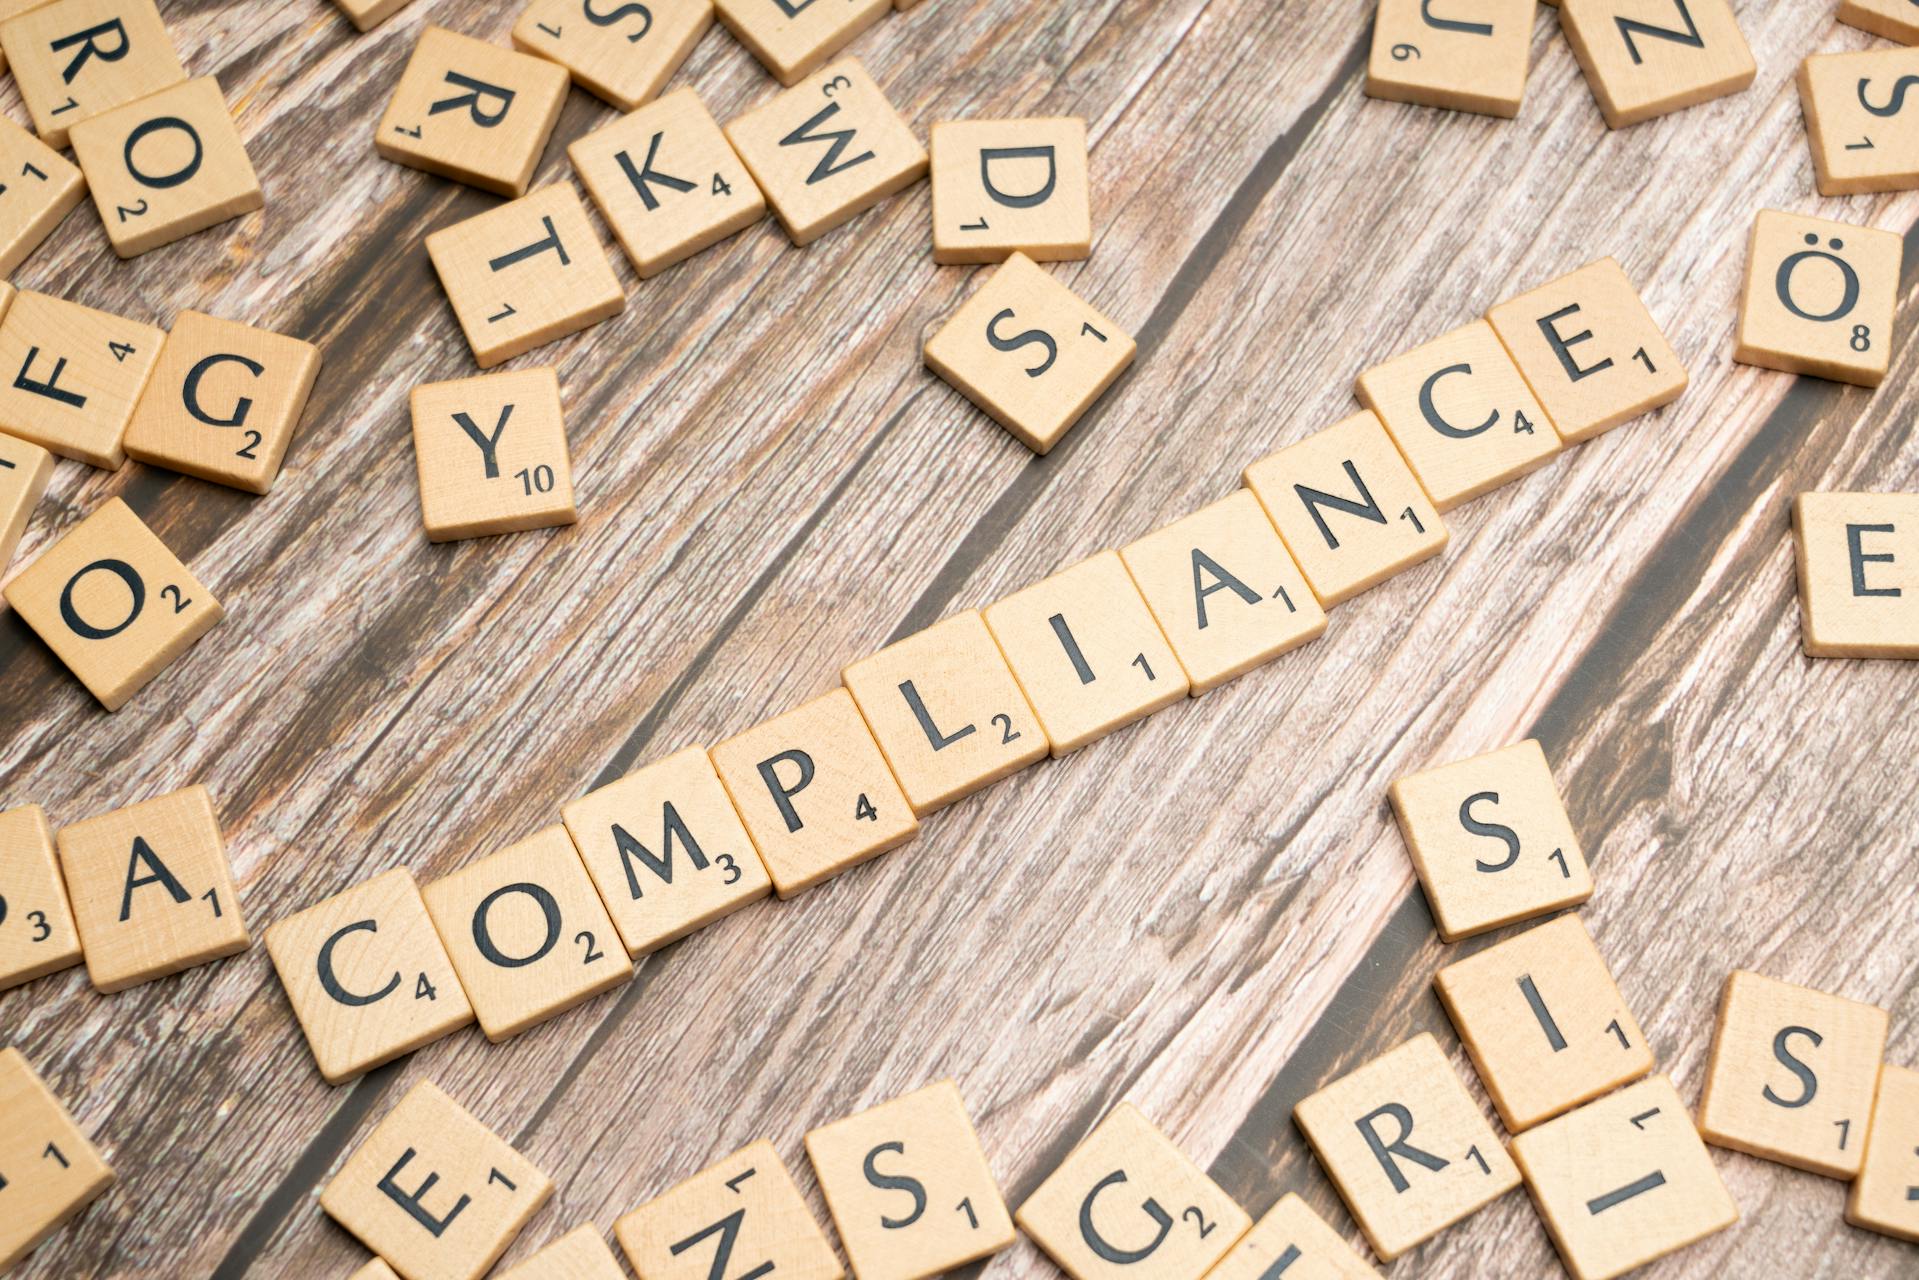 Compliance Services - RiaFin Planning Network